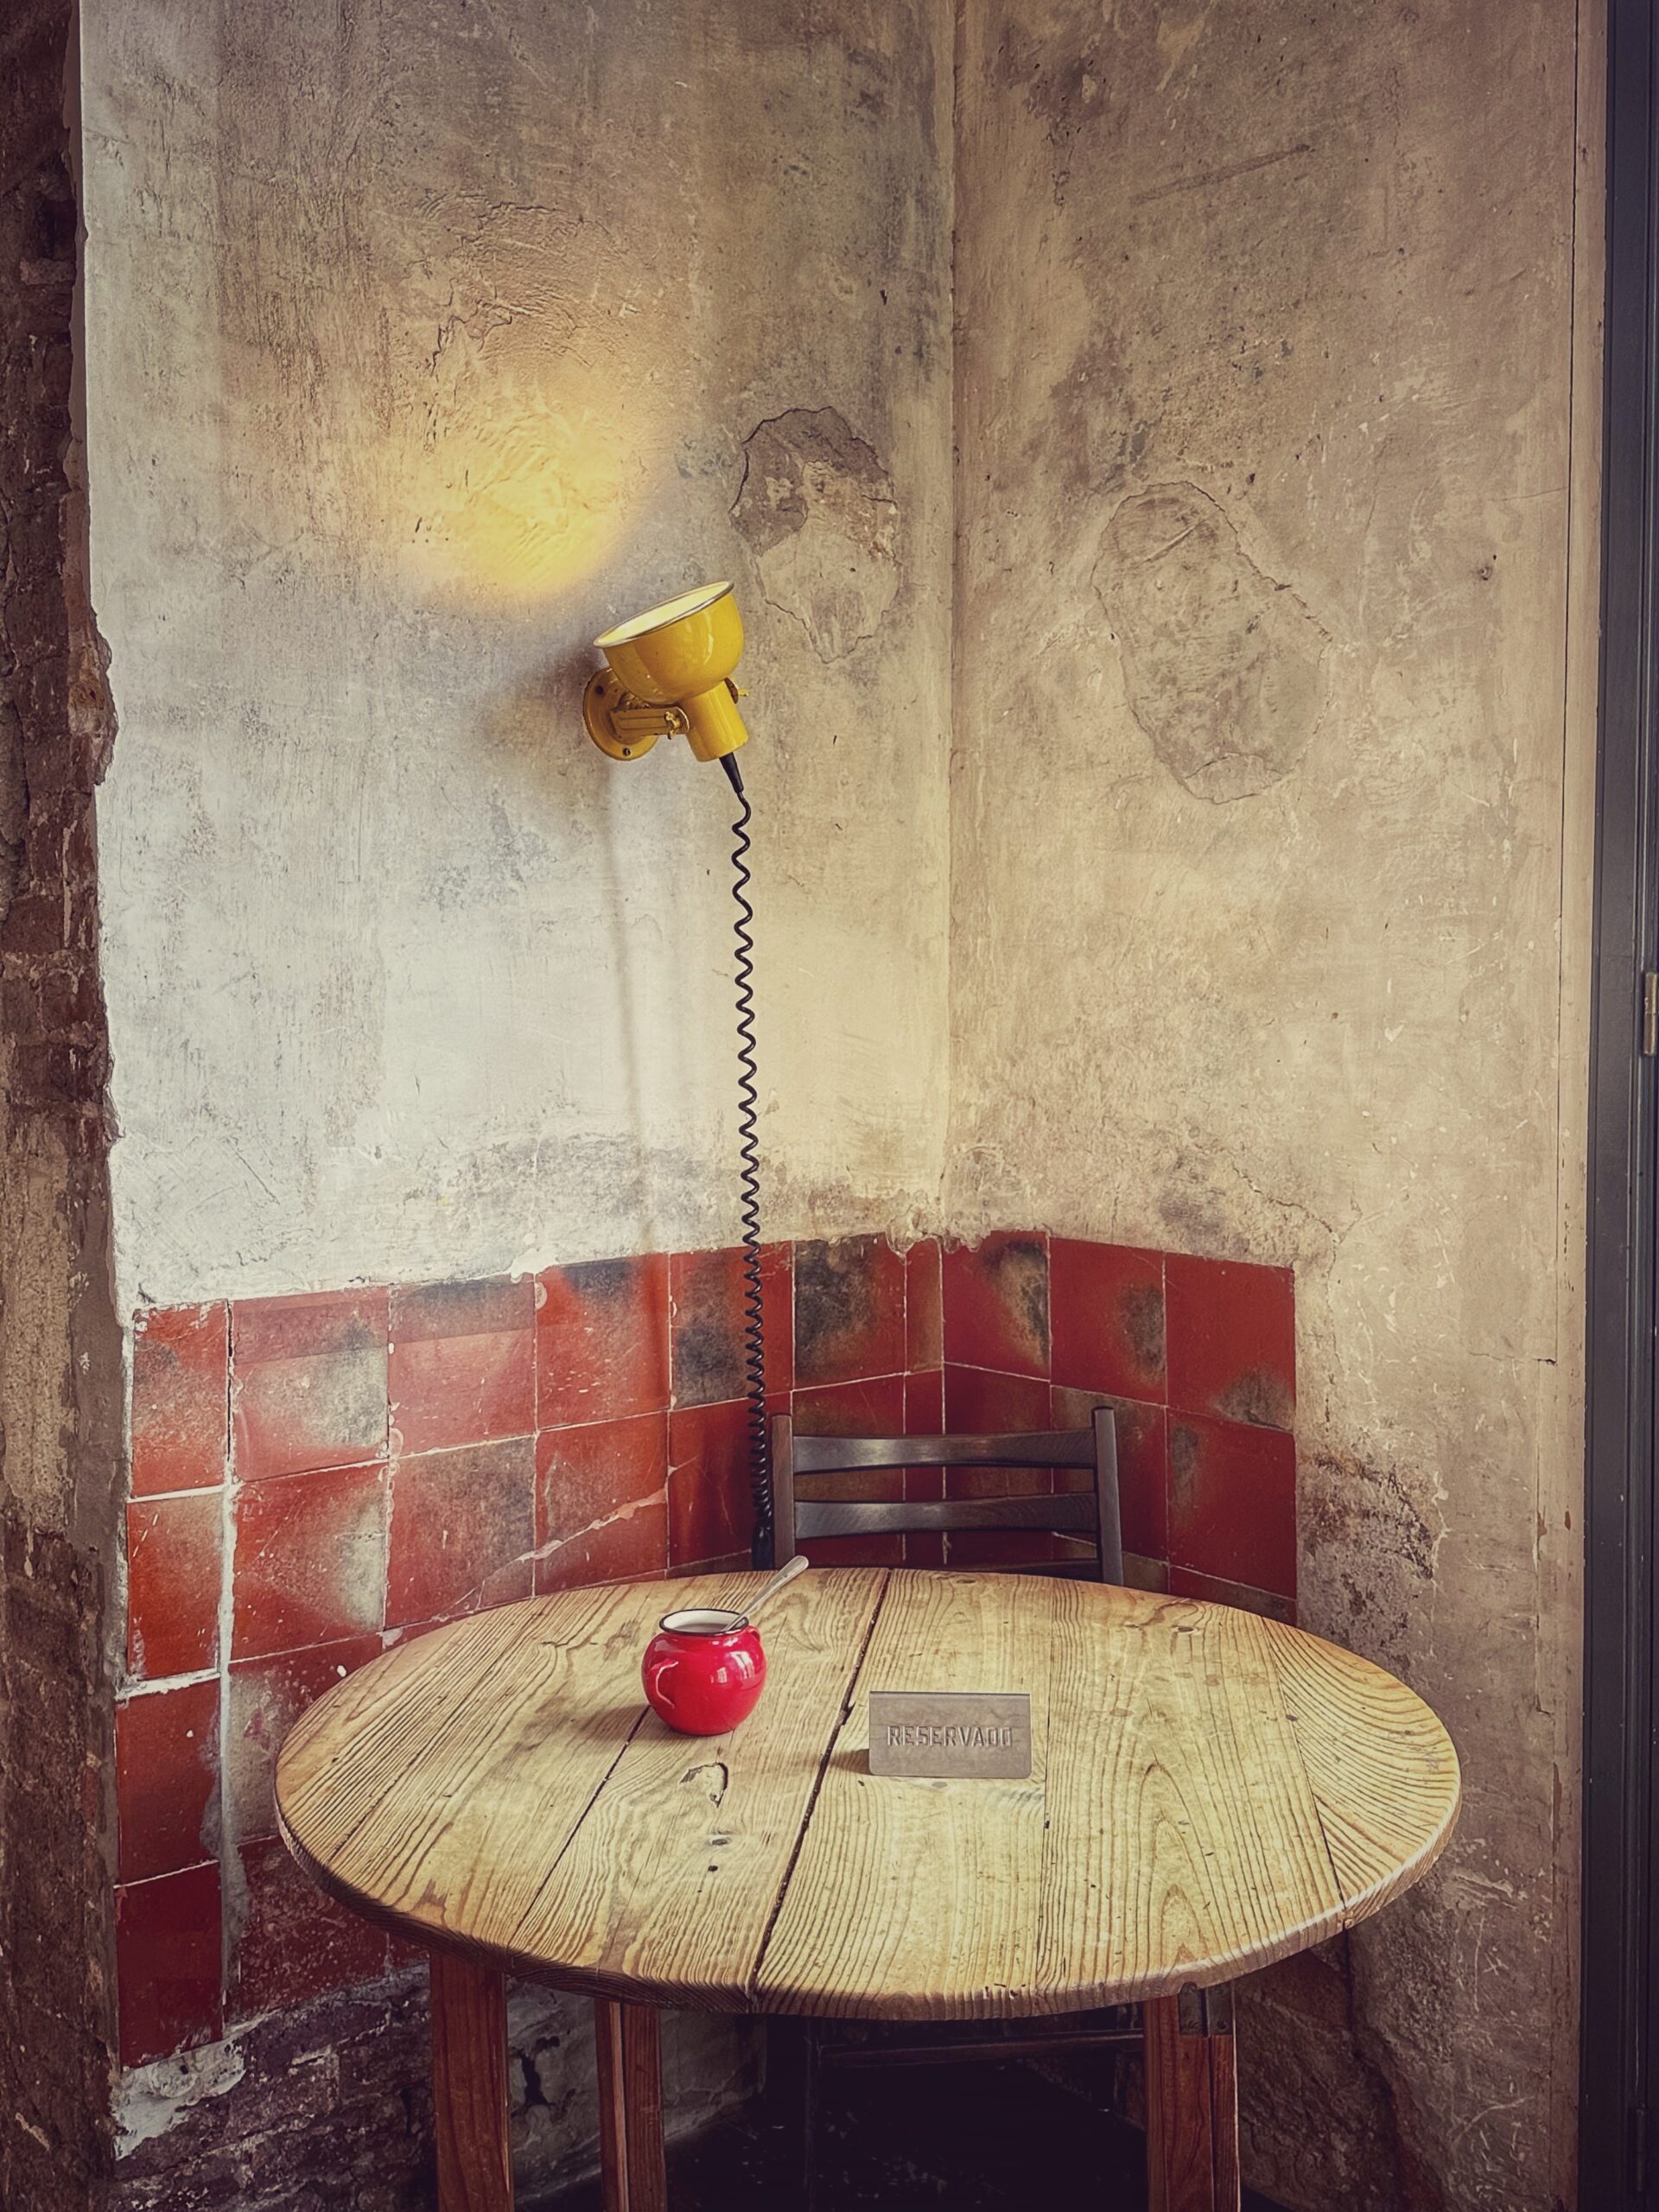 A table with a lamp in a small room.